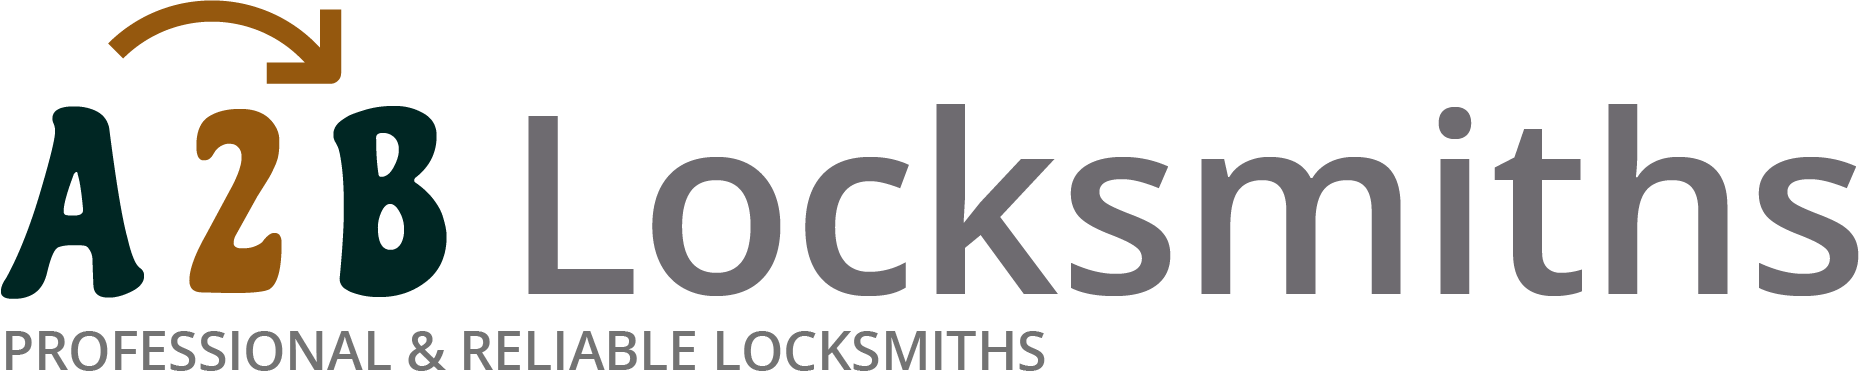 If you are locked out of house in Hartlepool, our 24/7 local emergency locksmith services can help you.